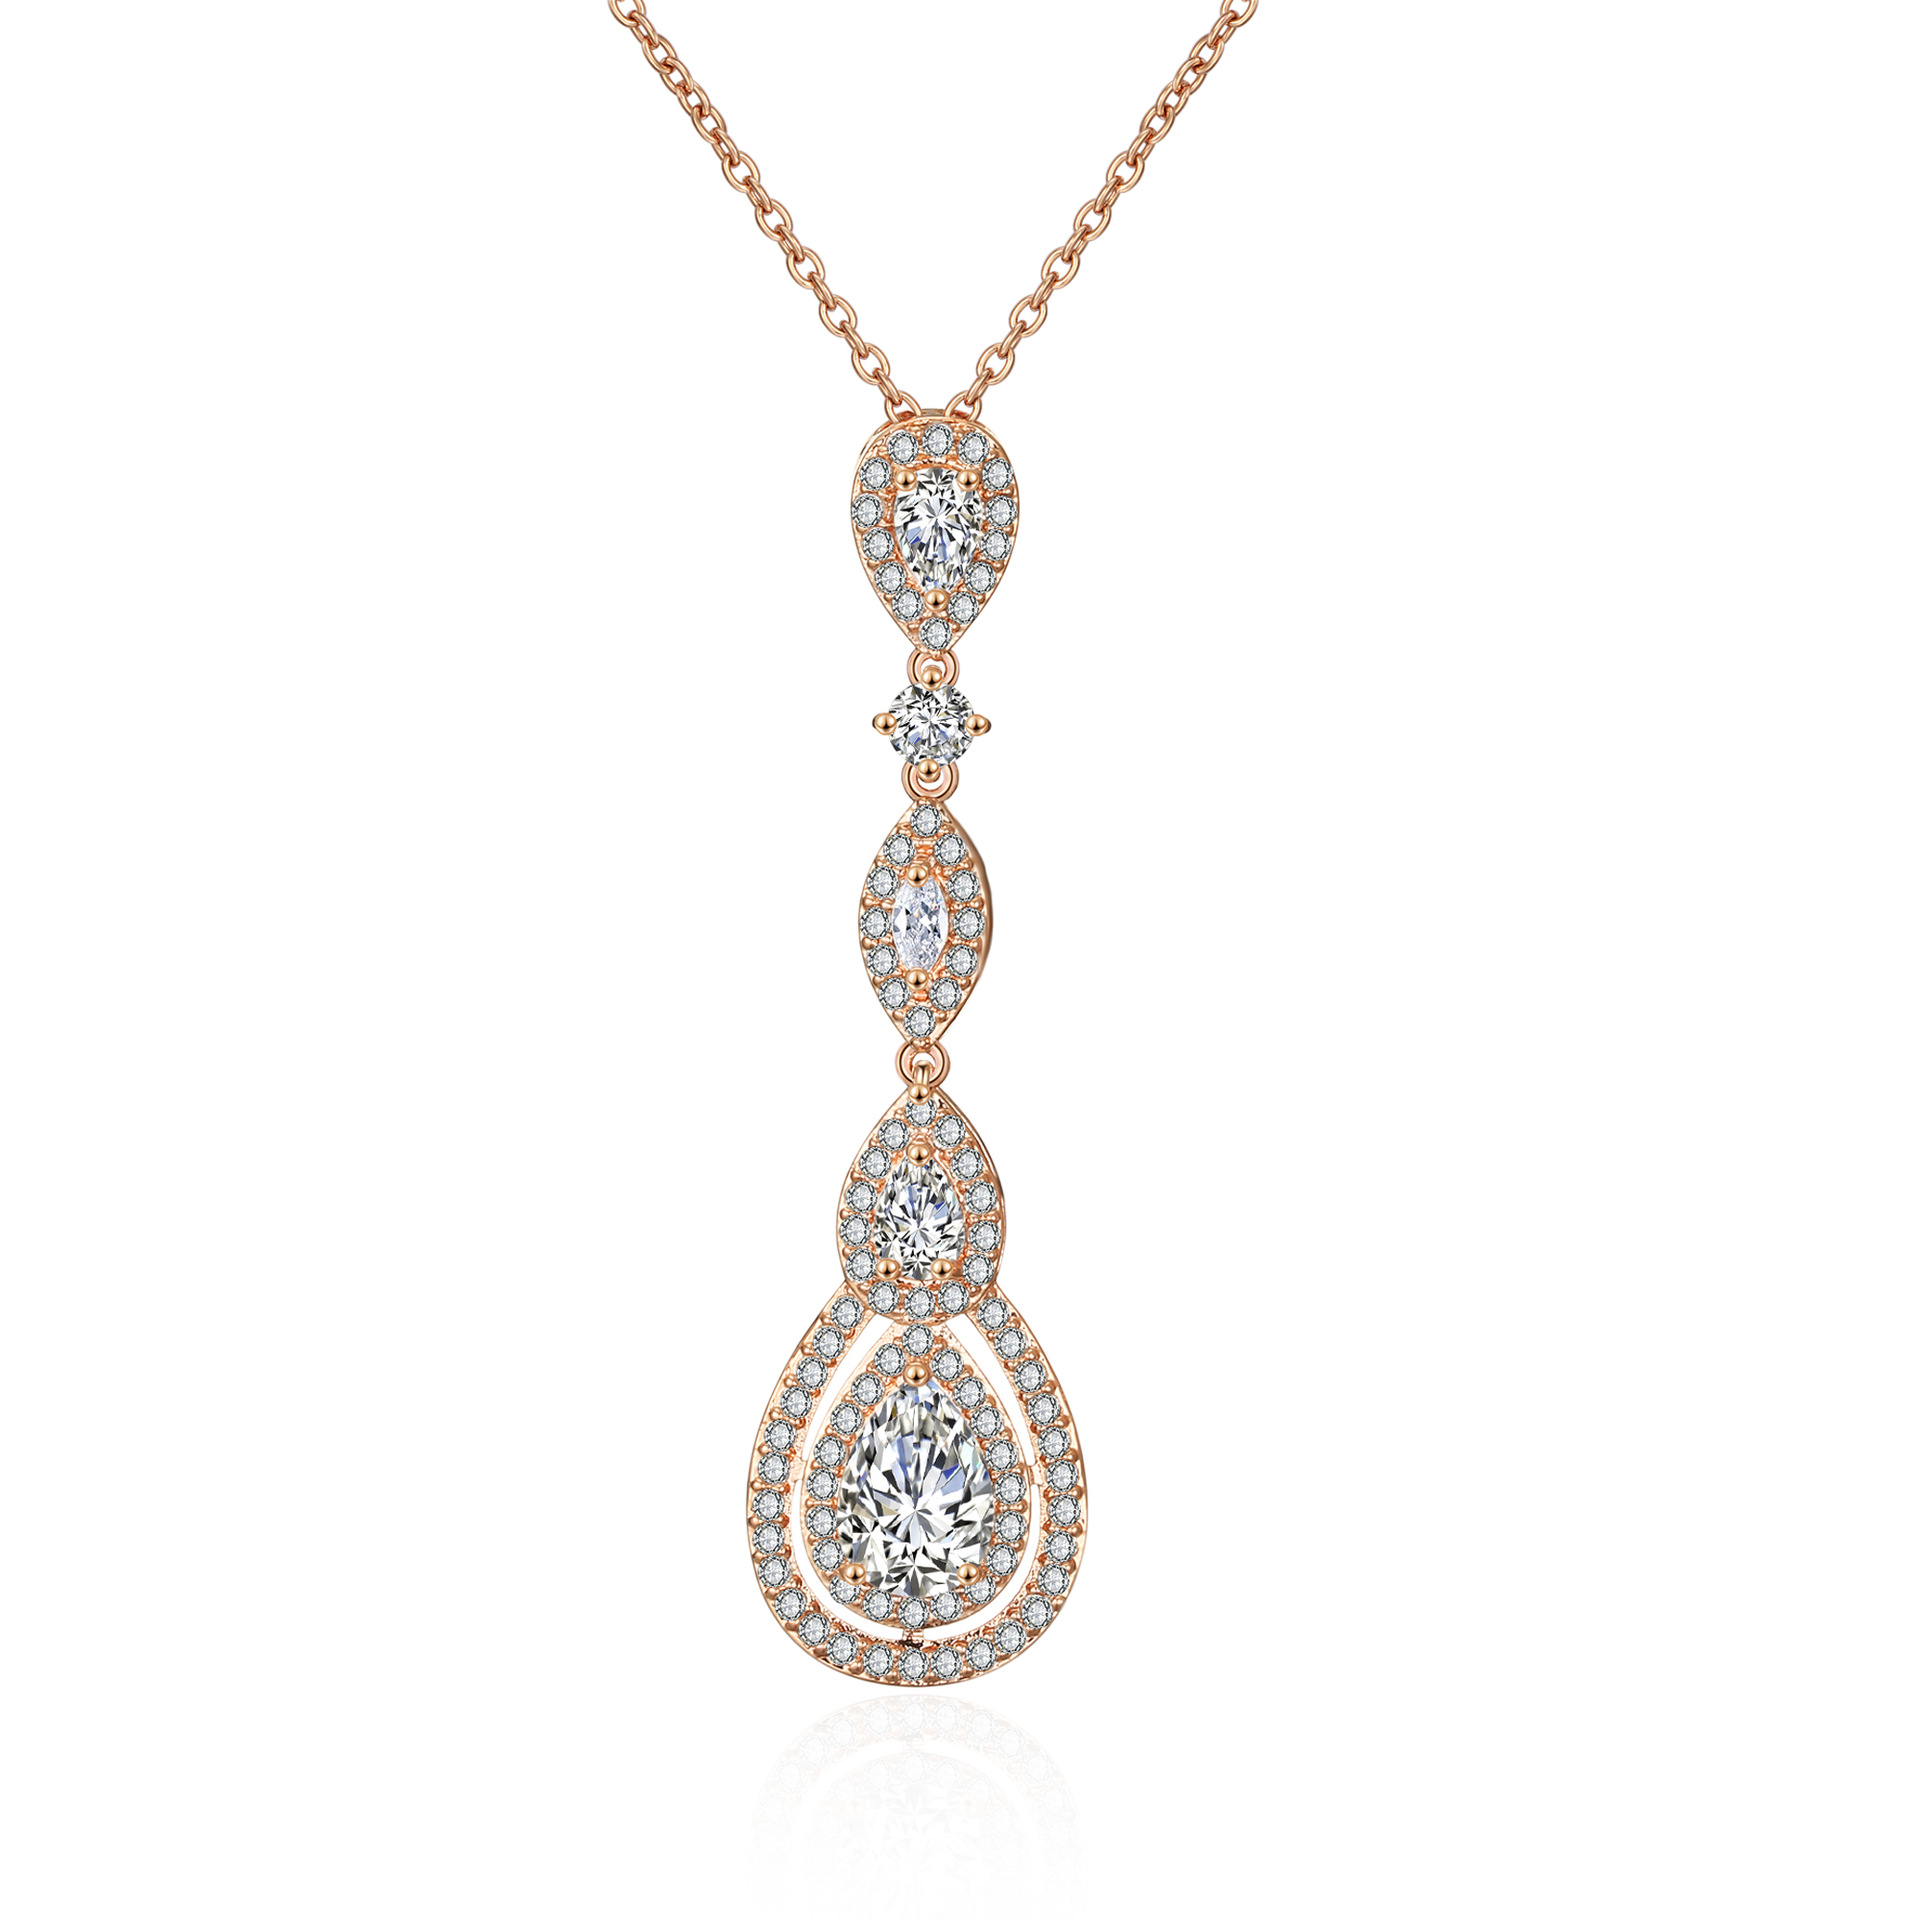 Necklace rose gold color plated